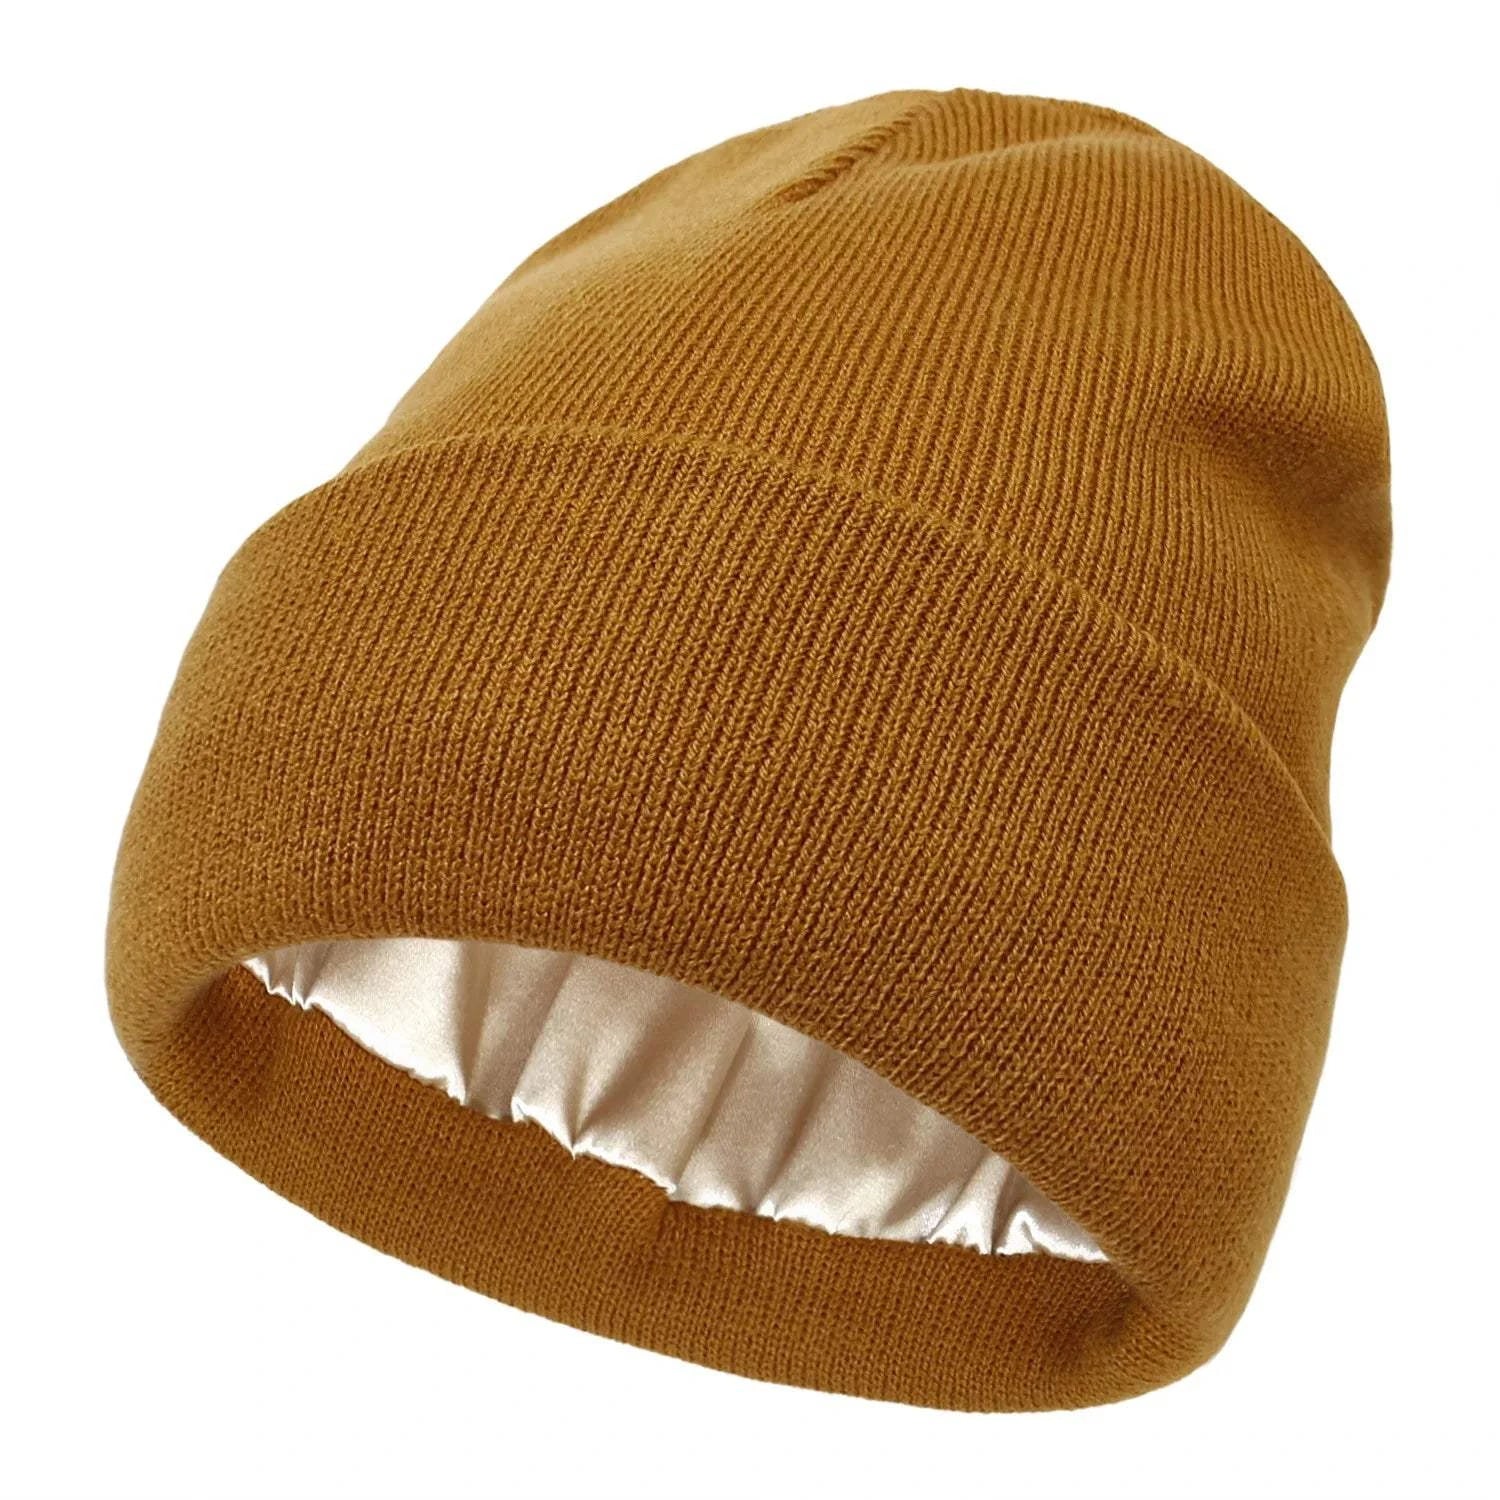 New design silk lined winter knitted hats beanies satin lined knit bea